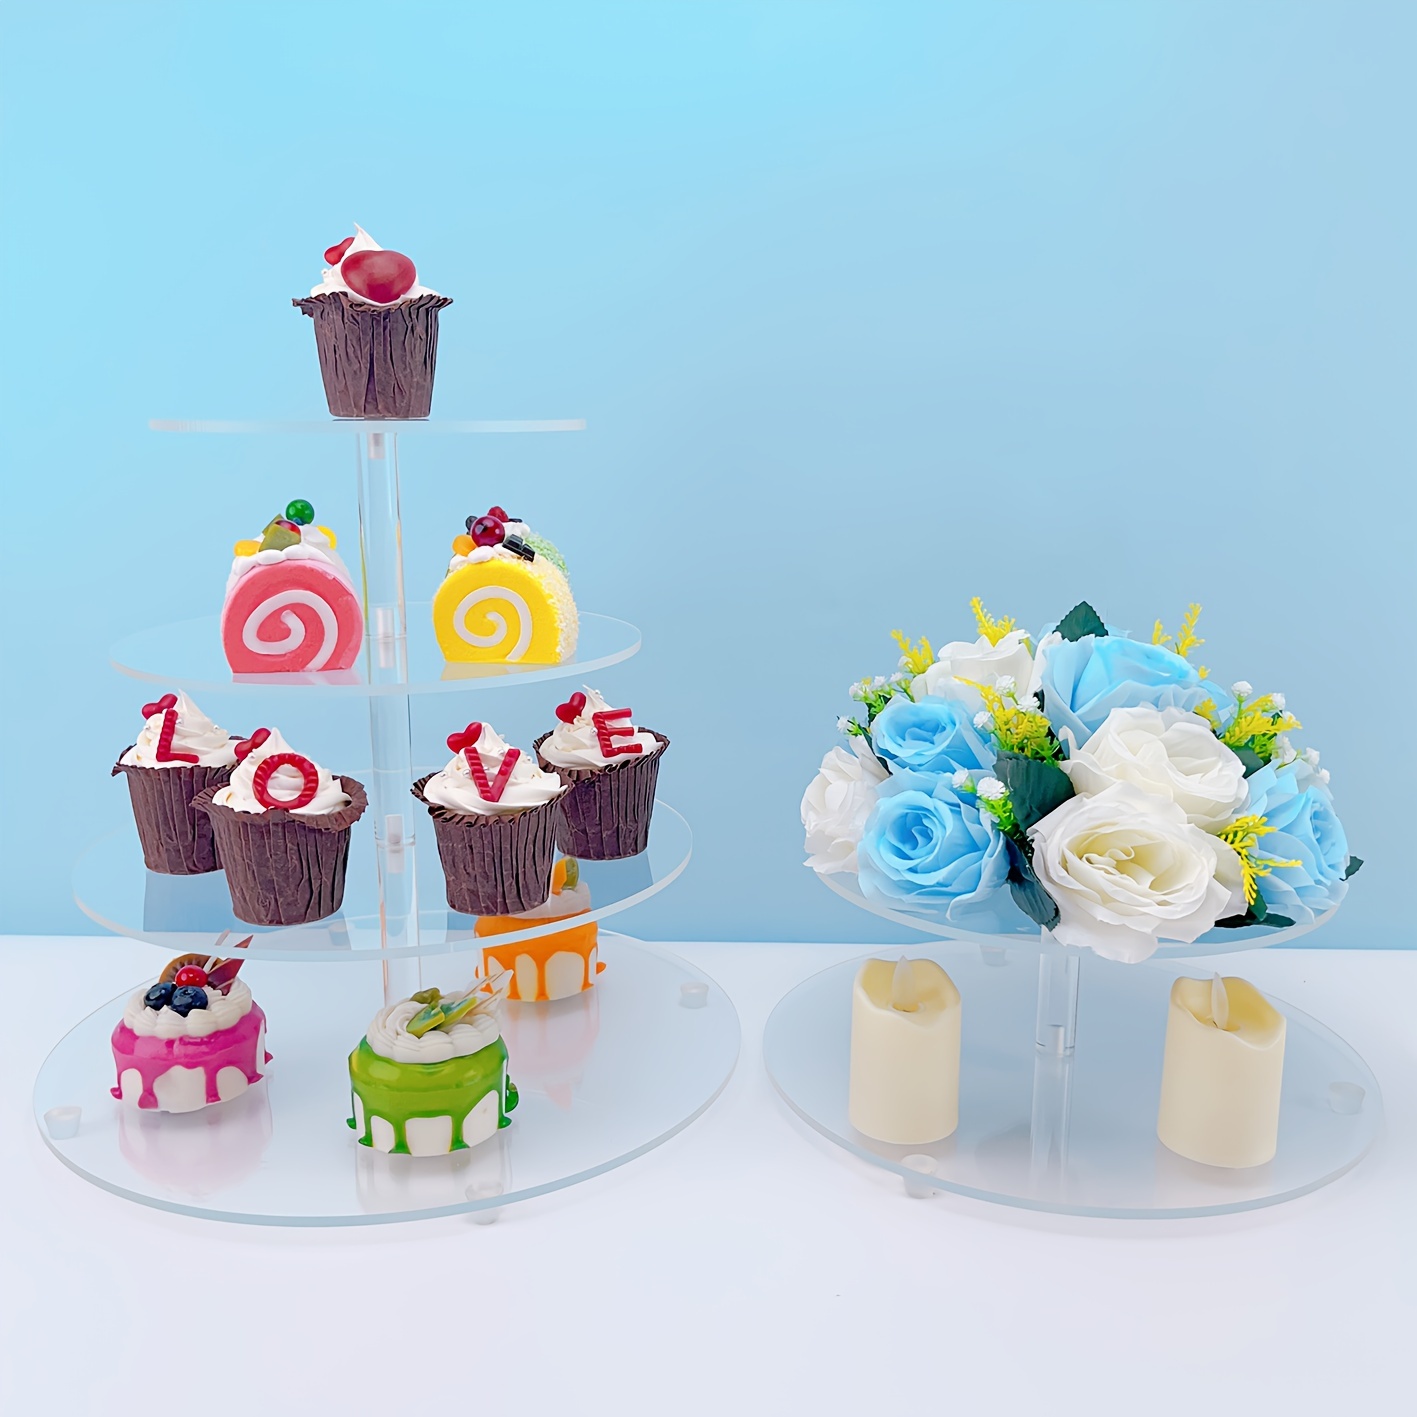 3 Pcs Cake Stand, Cake Pop Stand Set of Disc Diameter 8 10 12, Tall Cake  Stands for Dessert Table, Perfect Display for Wedding, Party, Birthday